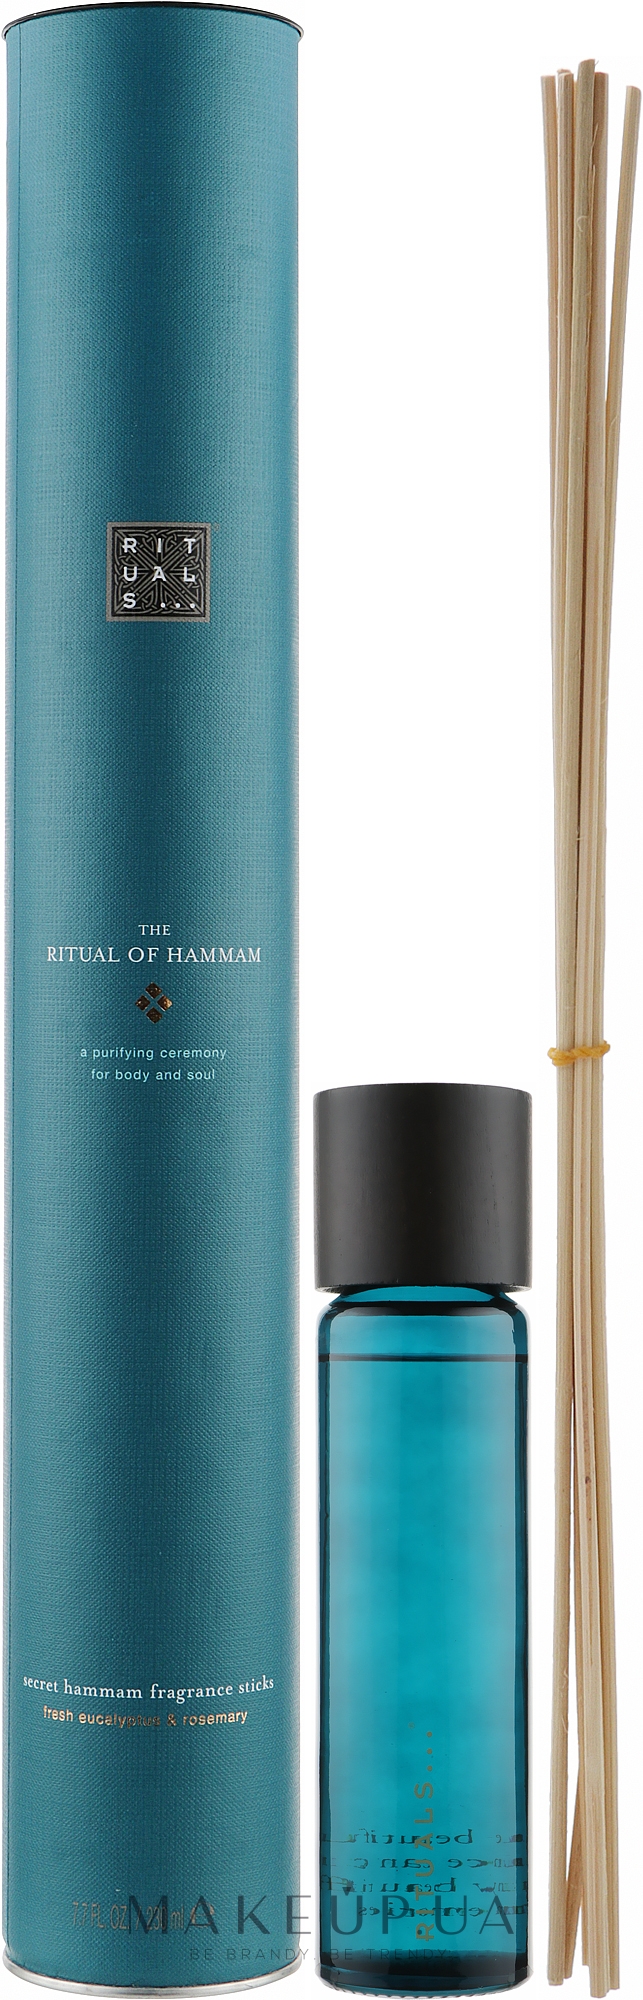 Rituals Mini Fragrance Sticks - The Ritual Of Hammam - A Purifying Ceremony  For Body And Soul Fragrance Sticks